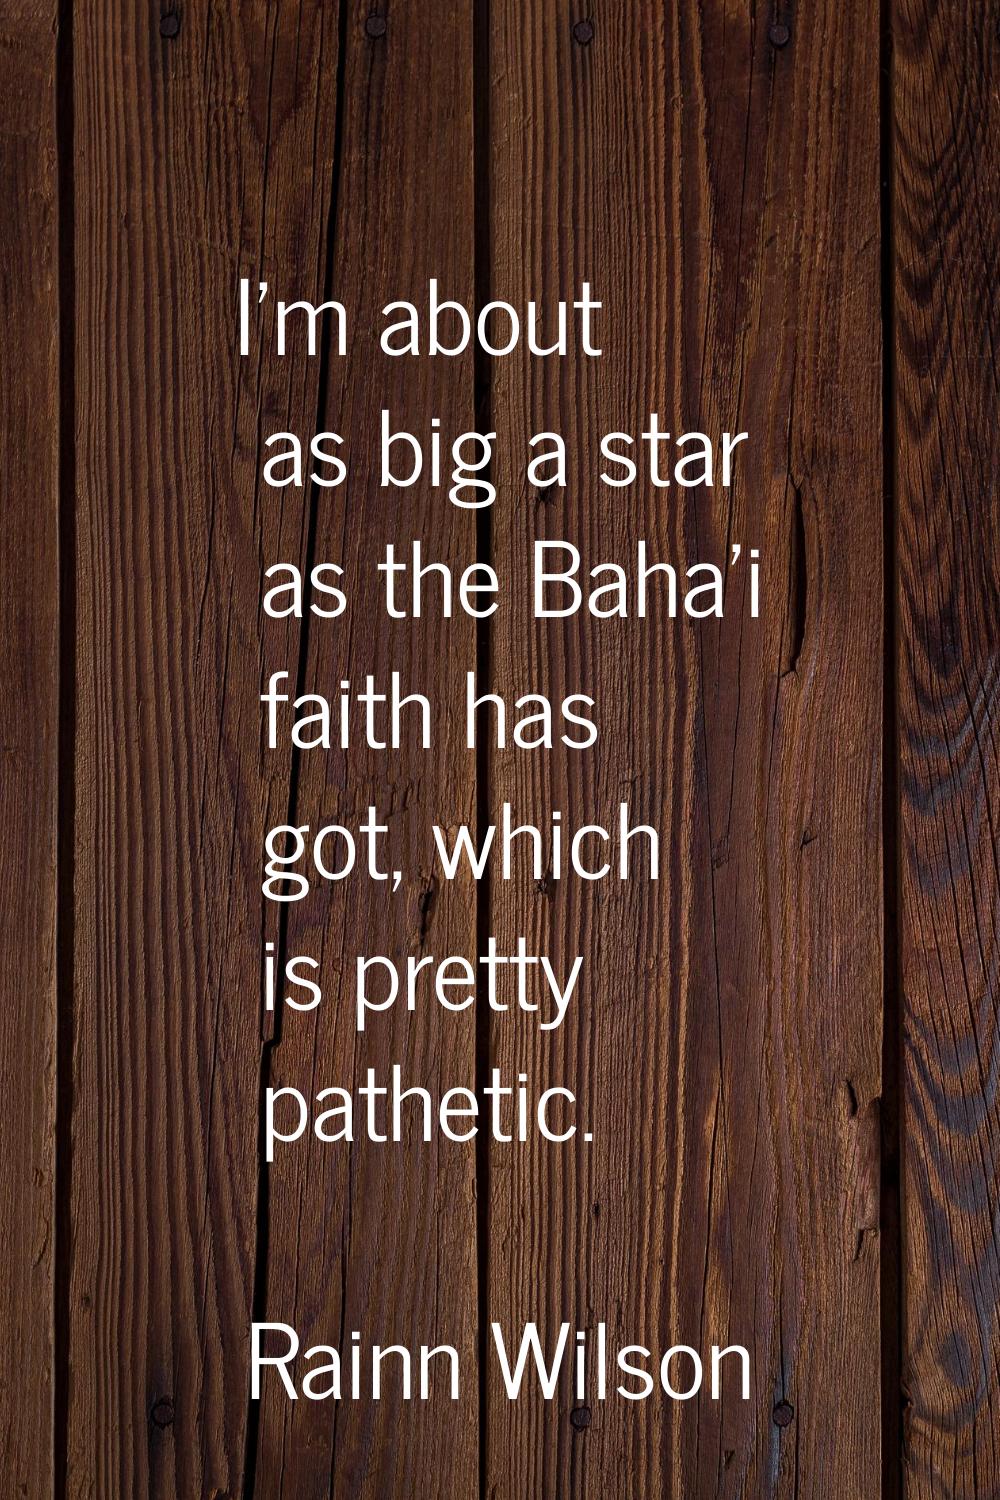 I'm about as big a star as the Baha'i faith has got, which is pretty pathetic.